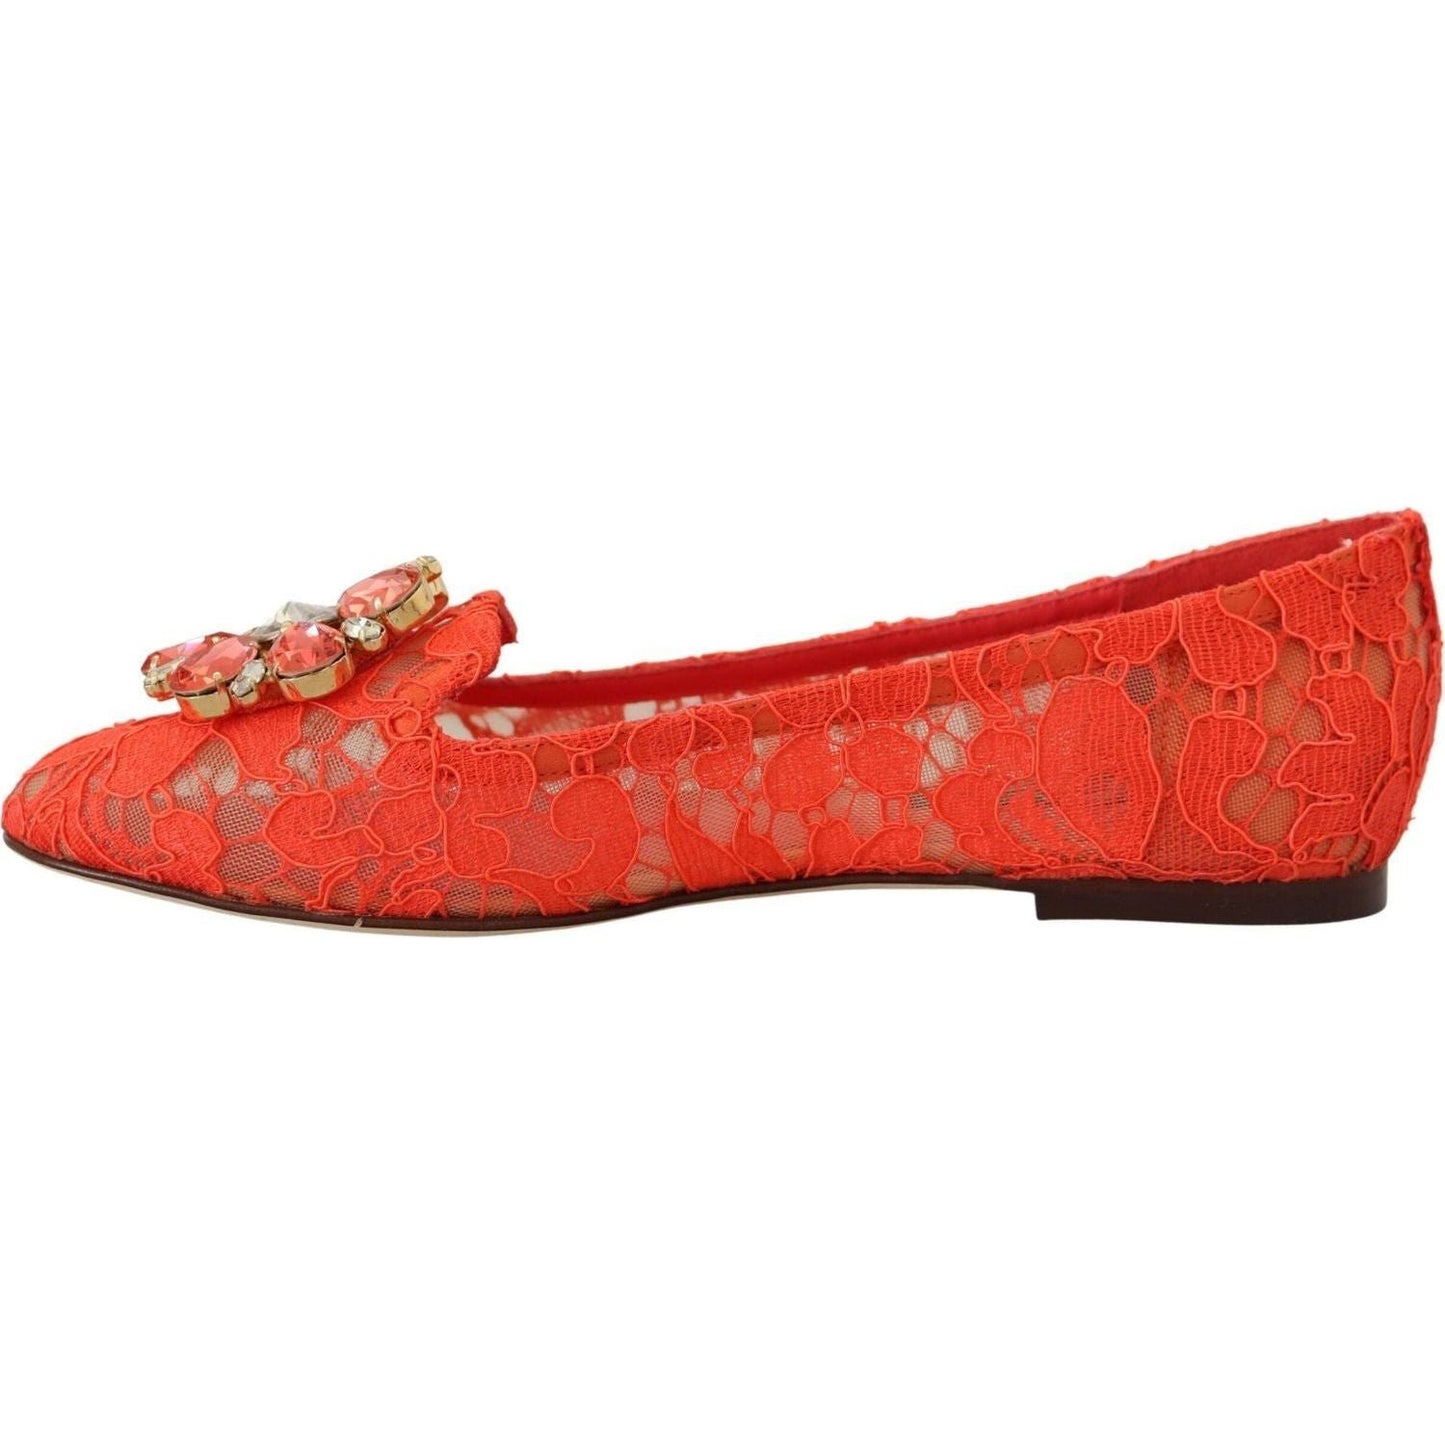 Dolce & Gabbana Elegant Lace Vally Flats in Coral Red red-taormina-lace-crystals-ballet-flats-shoes IMG_4968-scaled-ae1457a3-1d1.jpg